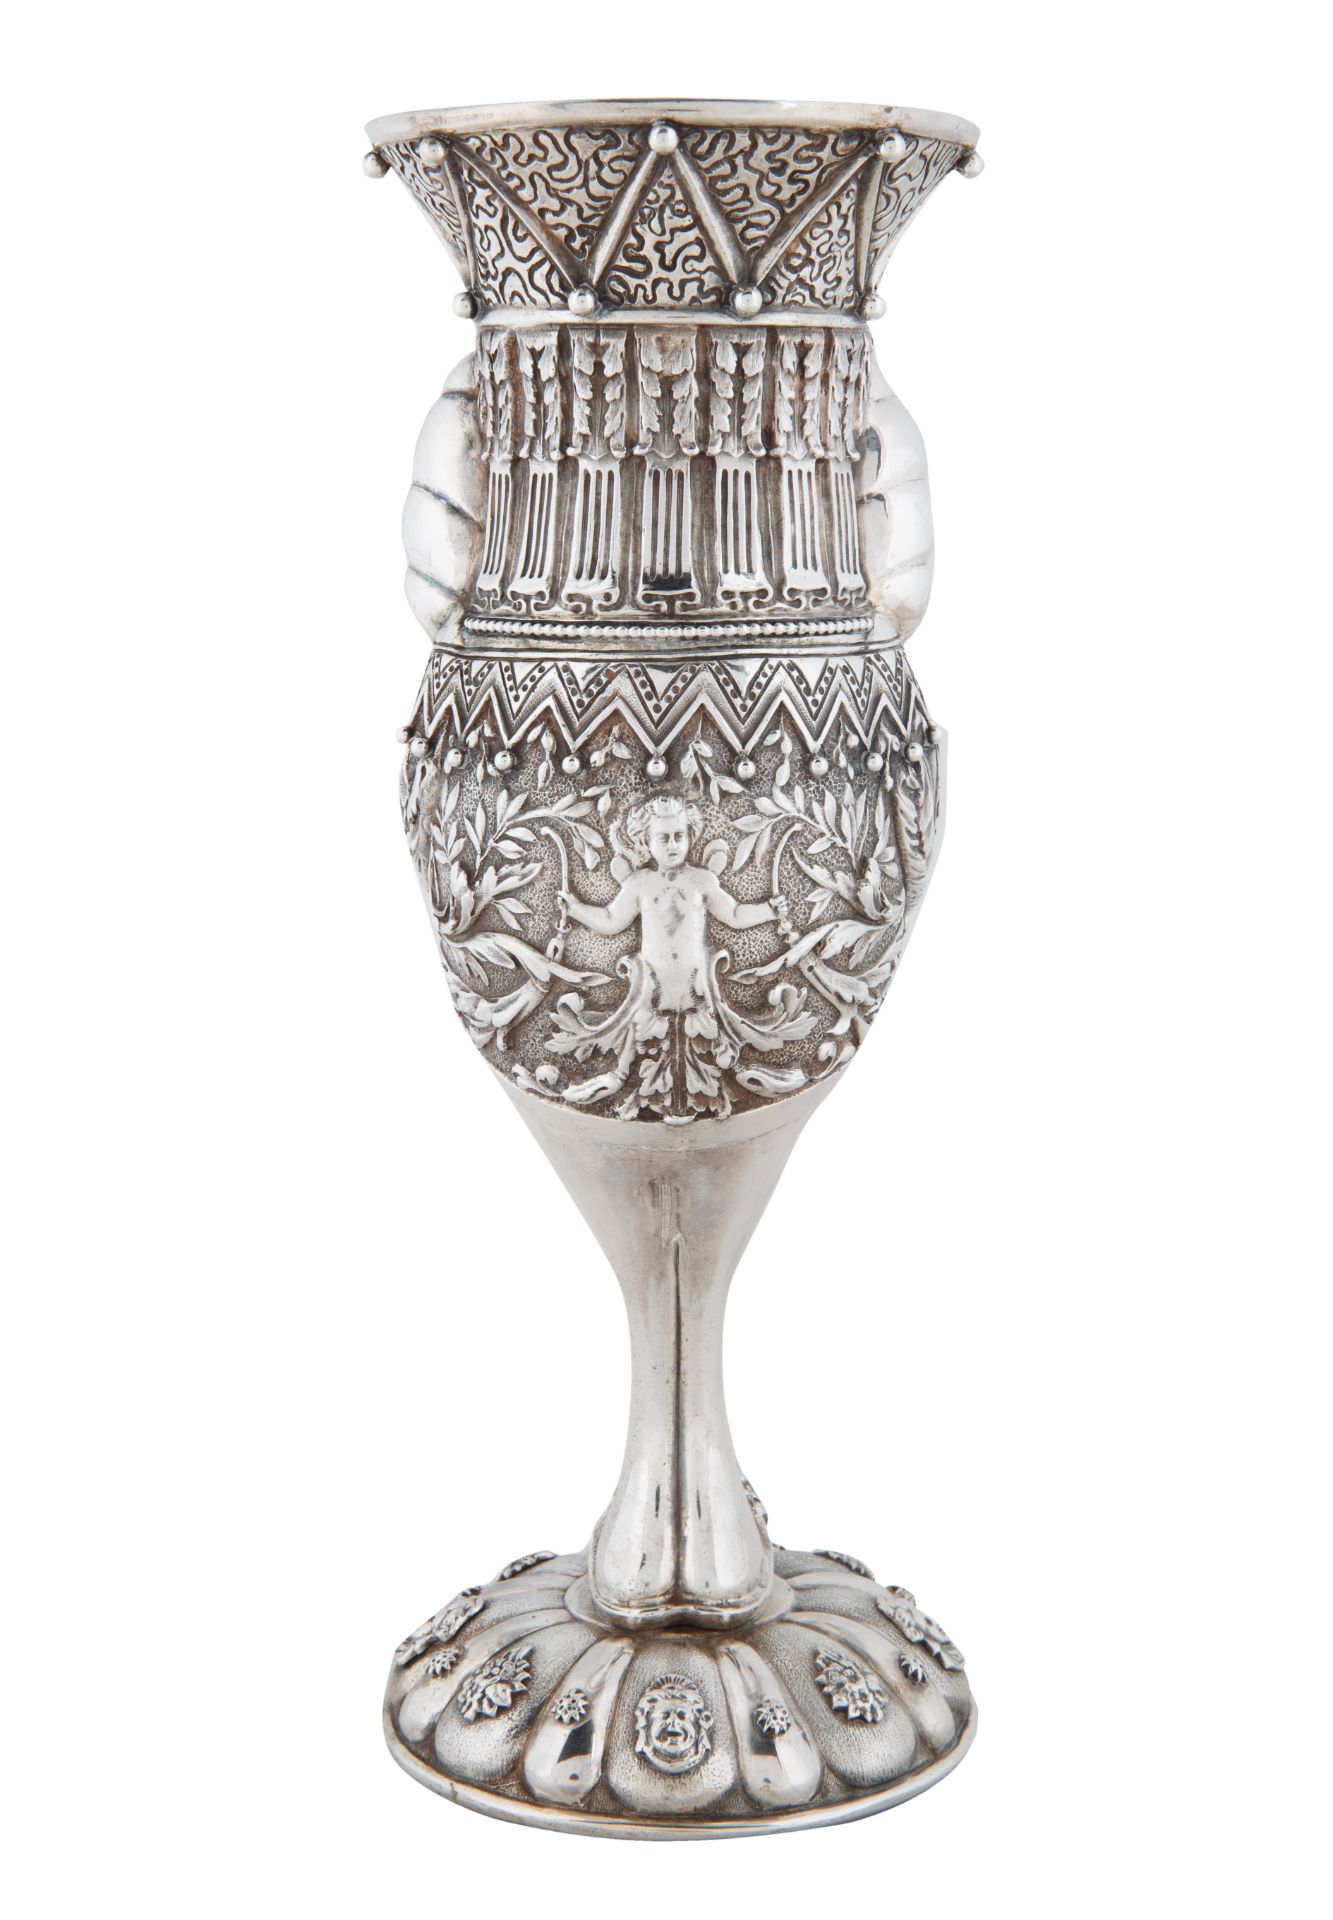 SILVER GOBLET BY MIKHAIL CHEMIAKIN (RUSSIAN B. 1943) - Image 3 of 6